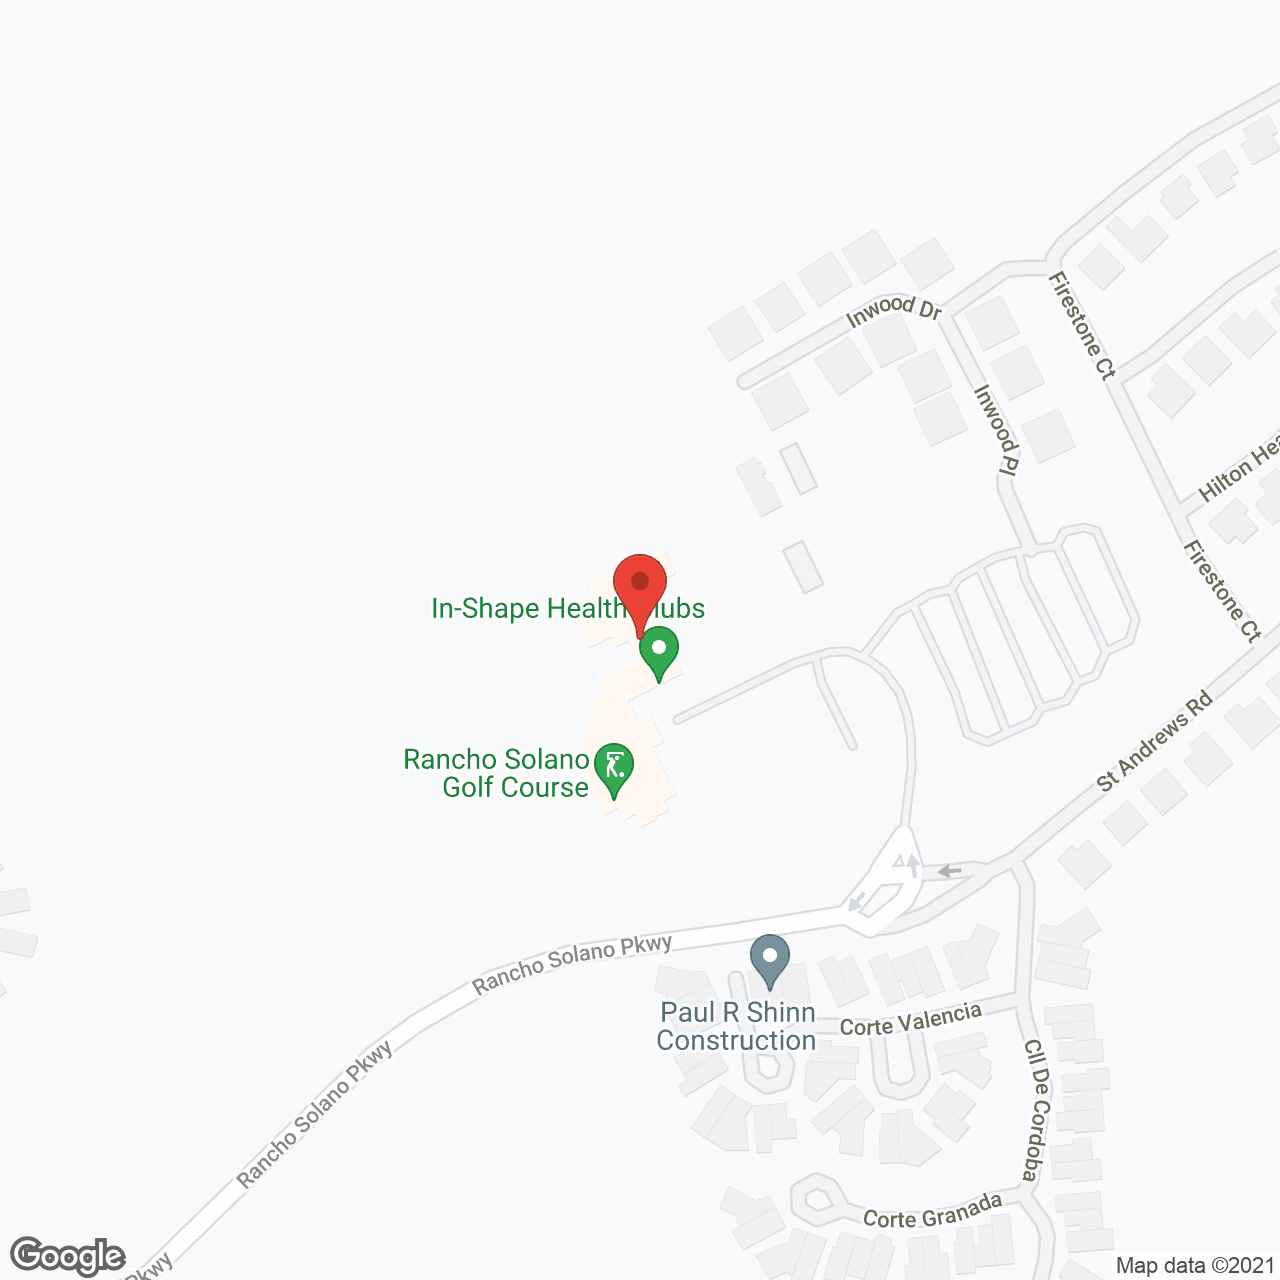 Northbay Rehab Svc in google map